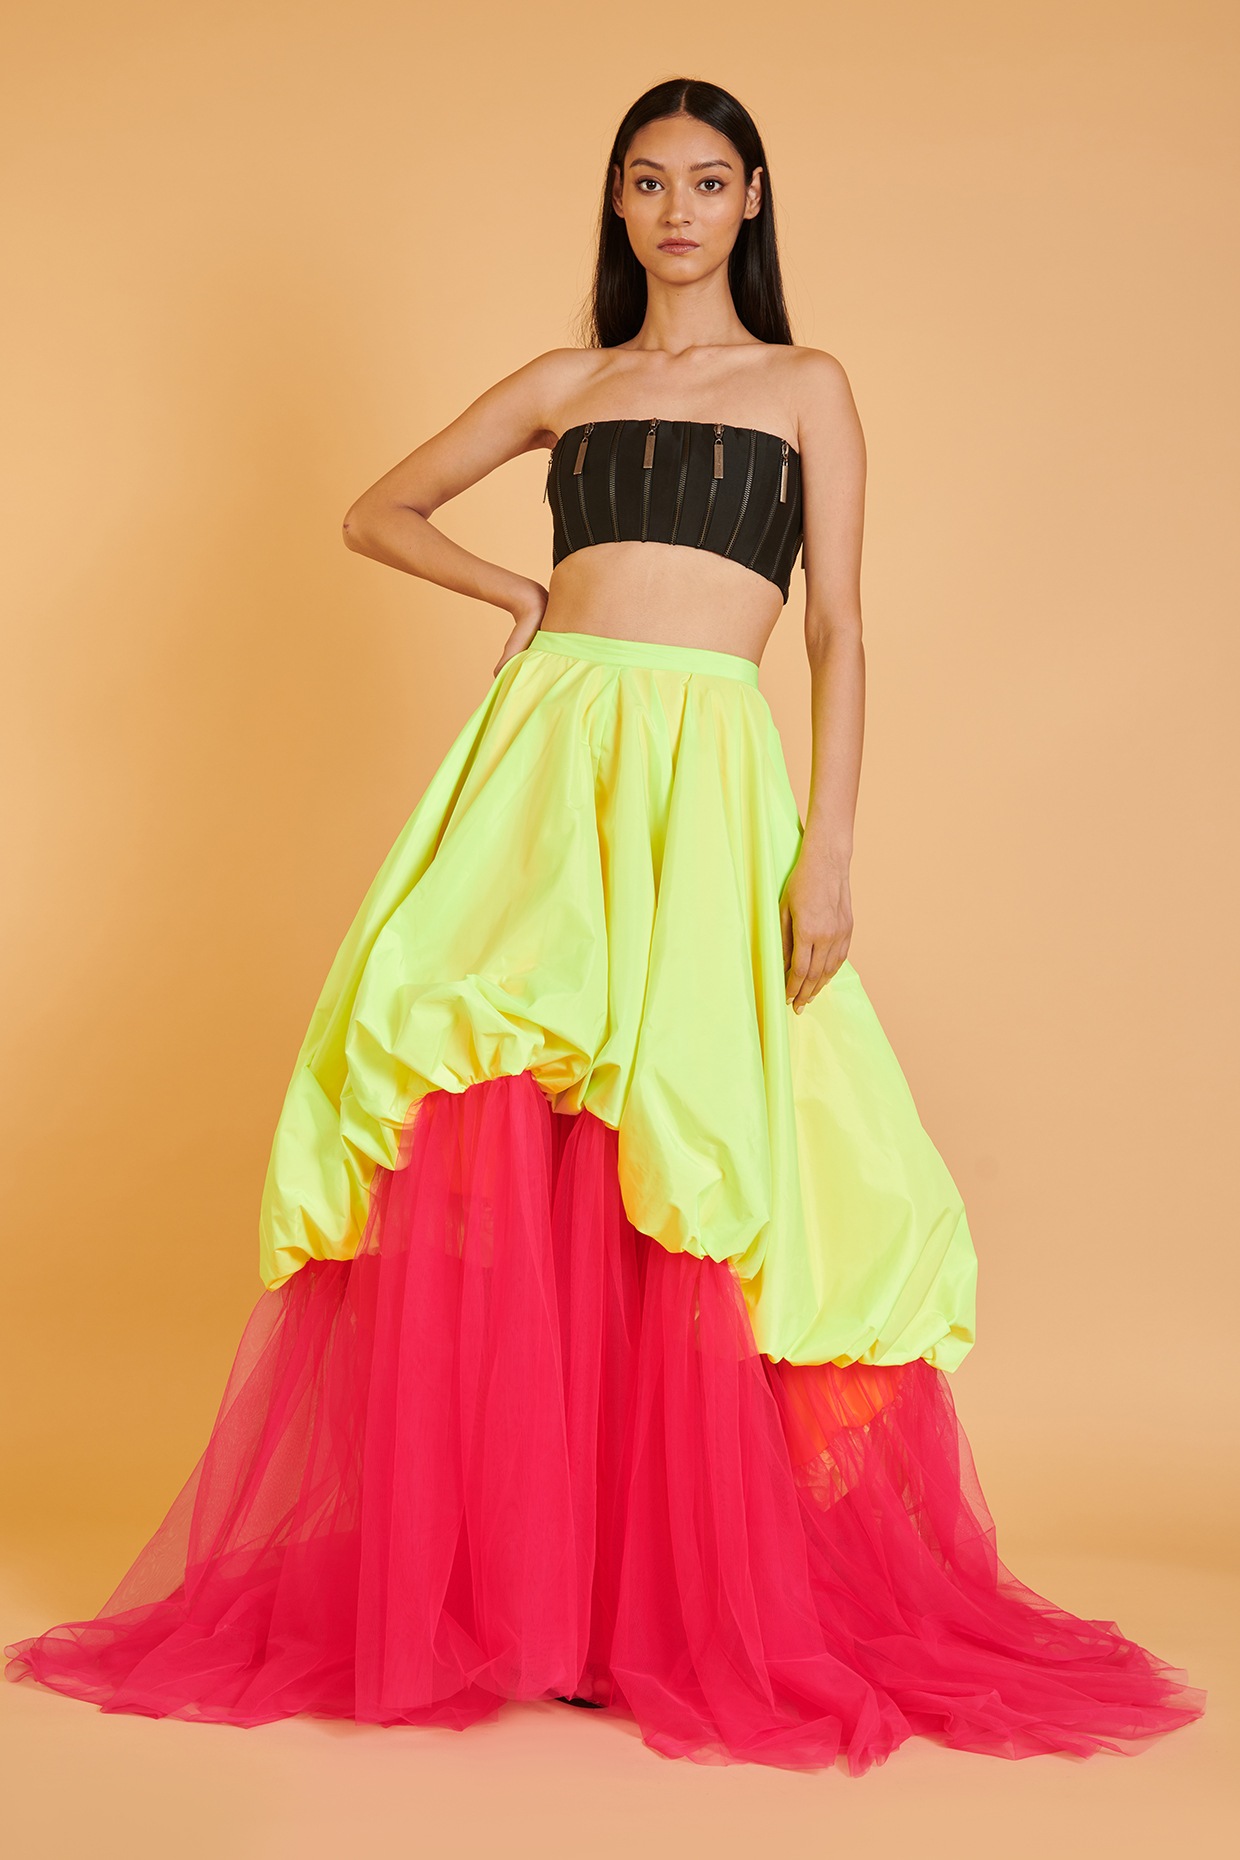 Strapless Leather-Like Gown with Full Skirt - Kate Barton Design